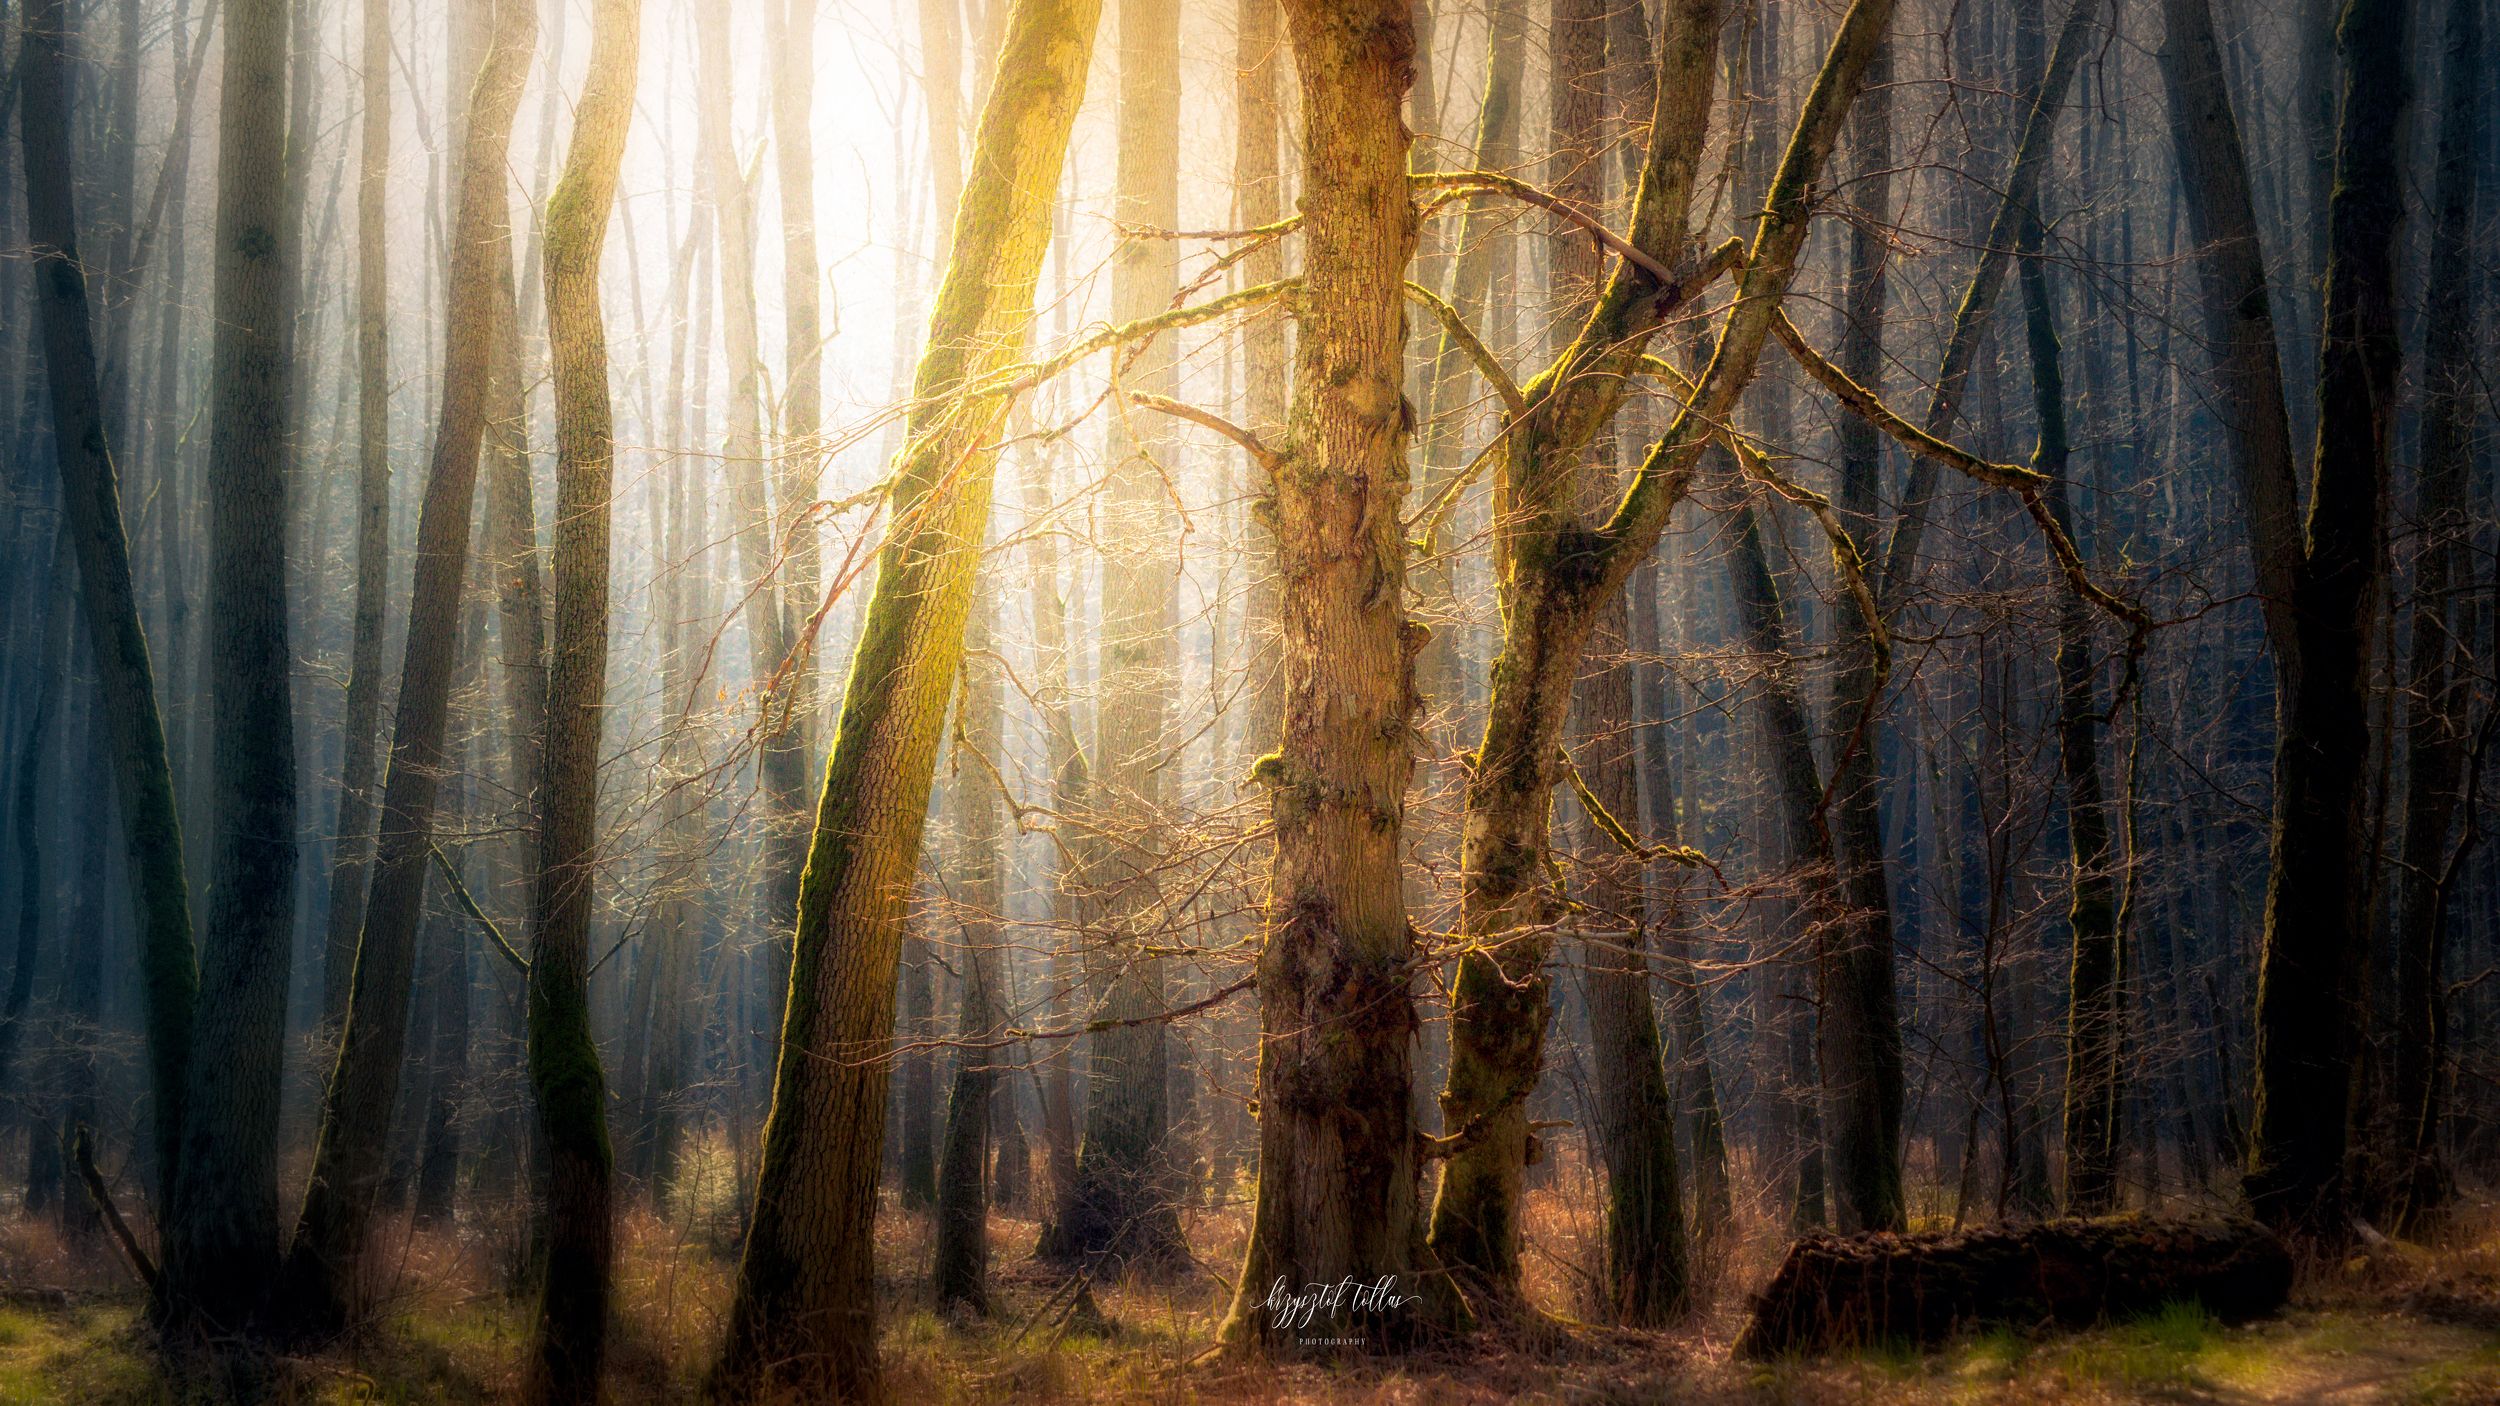 forest, natura, light, dawn, trees, forest atmosphere, nikon, mist, forest scenery, Krzysztof Tollas